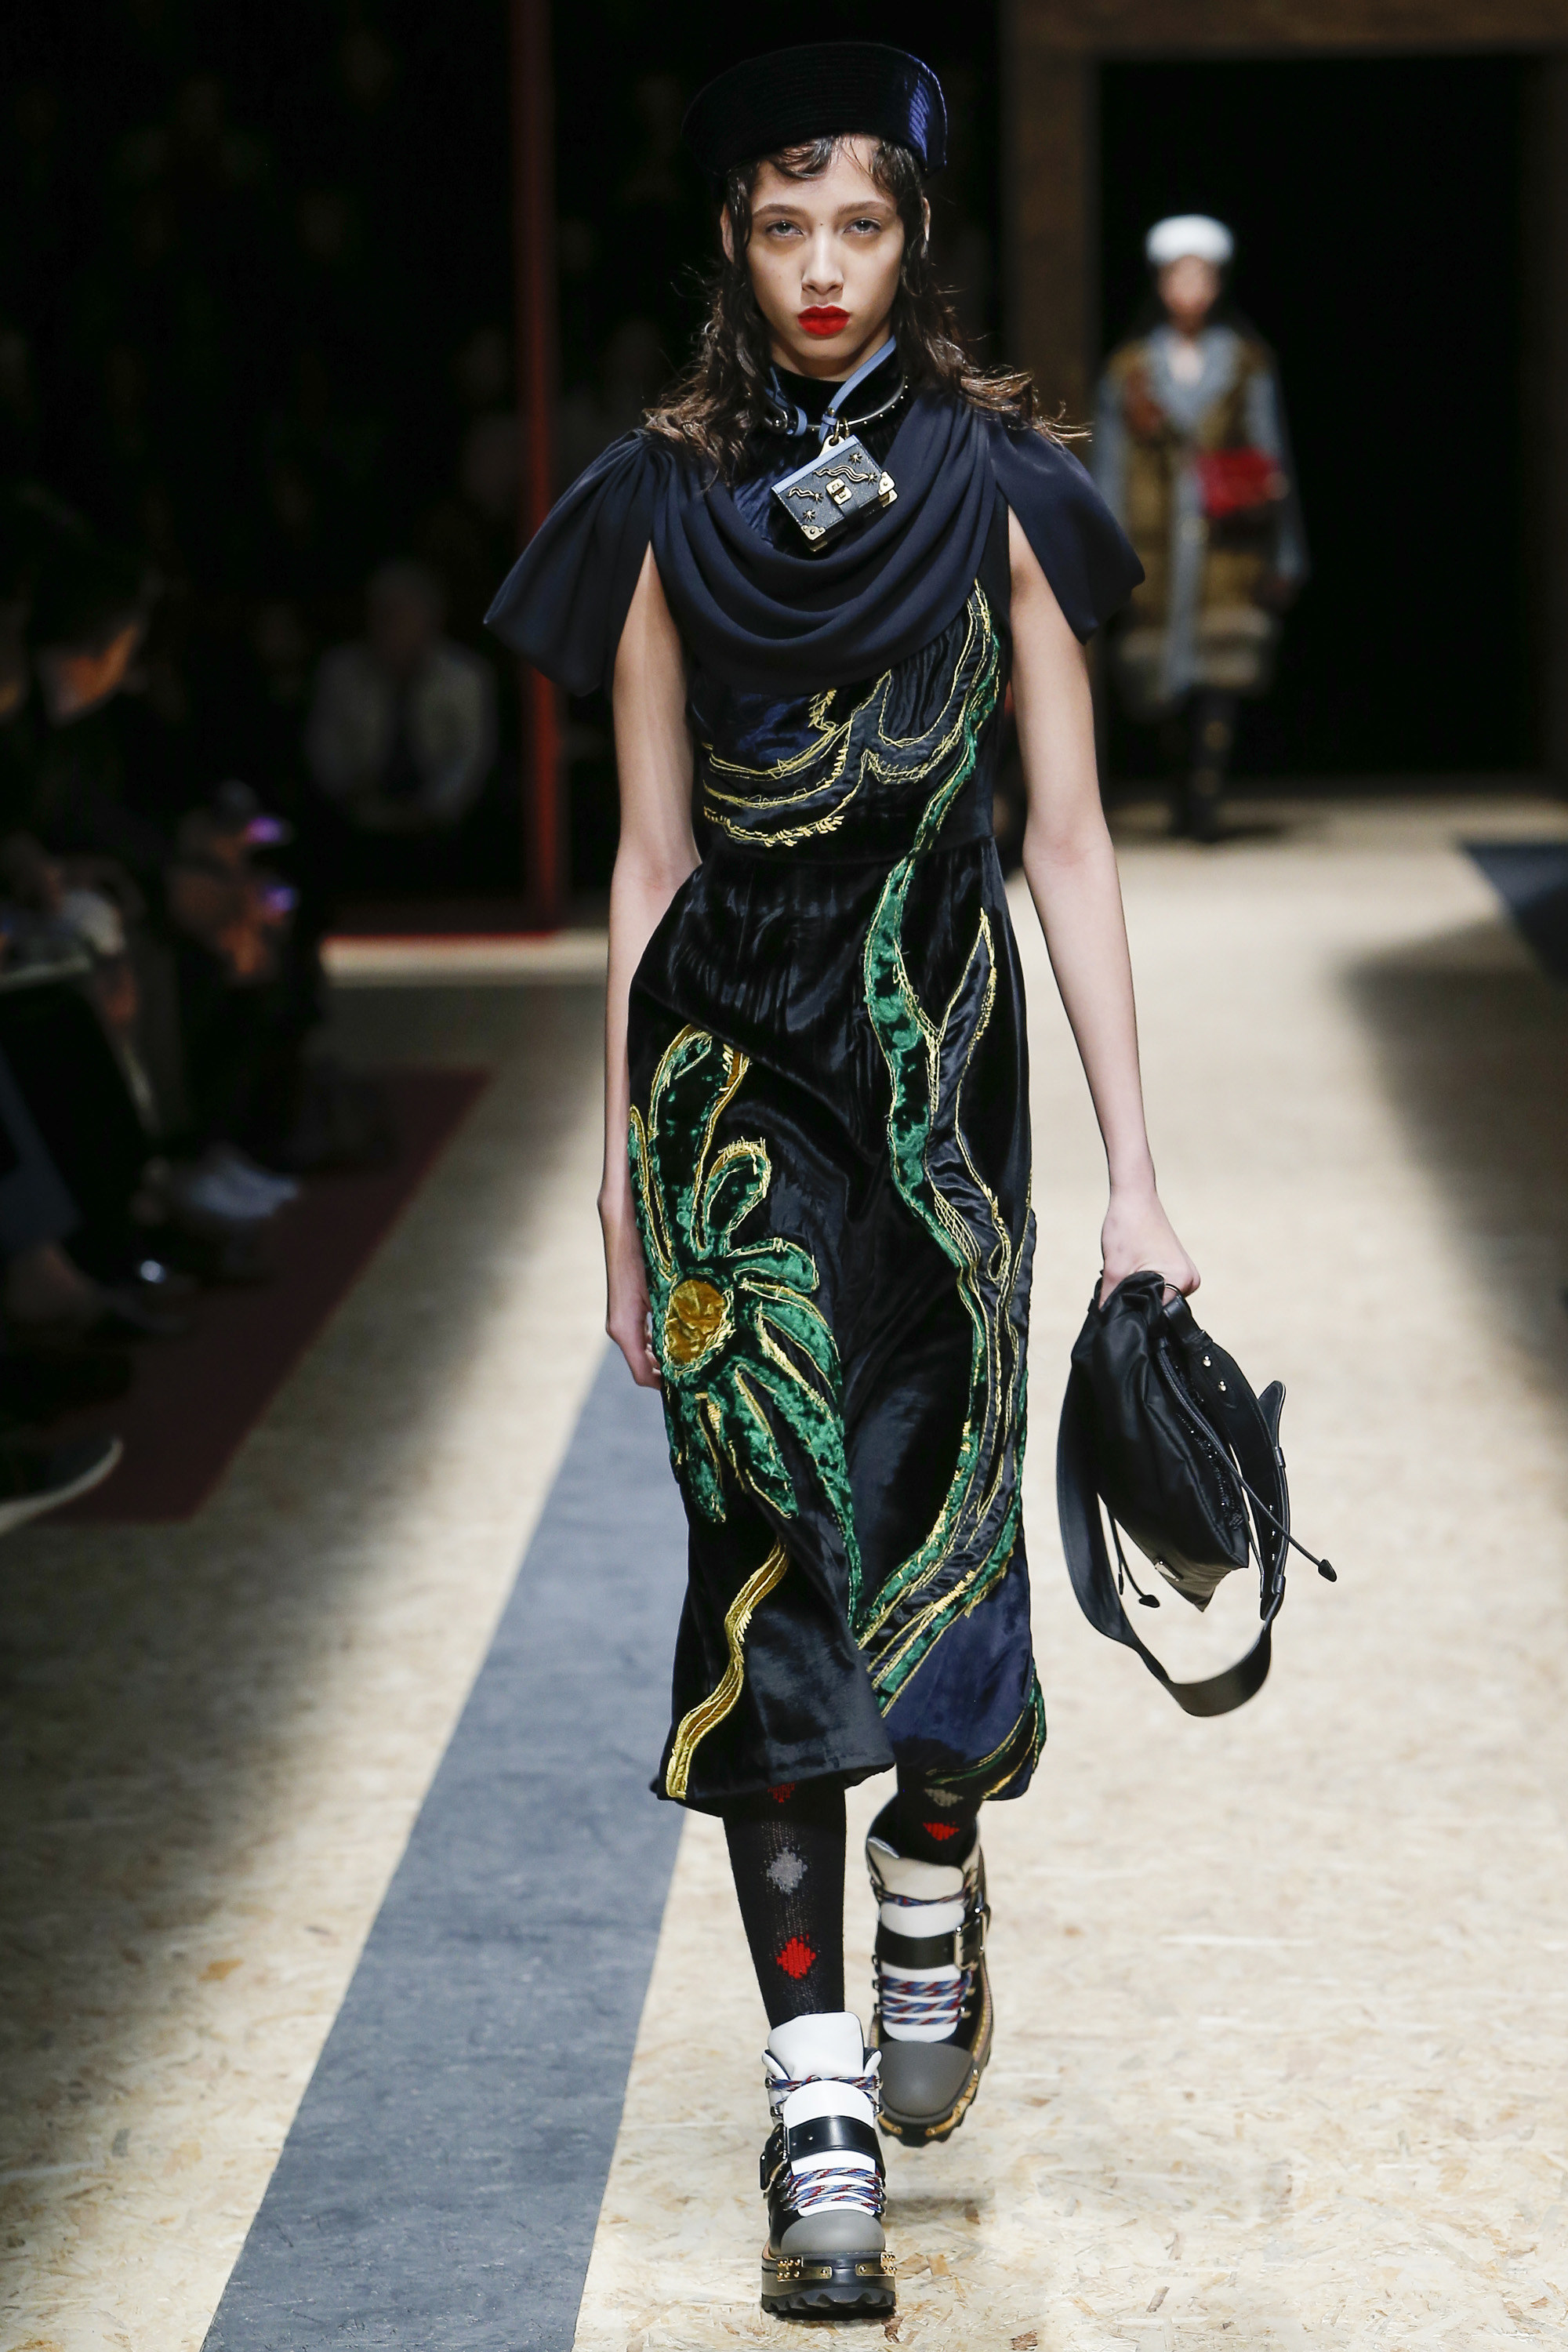 Prada Fall 2016 Ready To Wear – 50s style skirts and tights